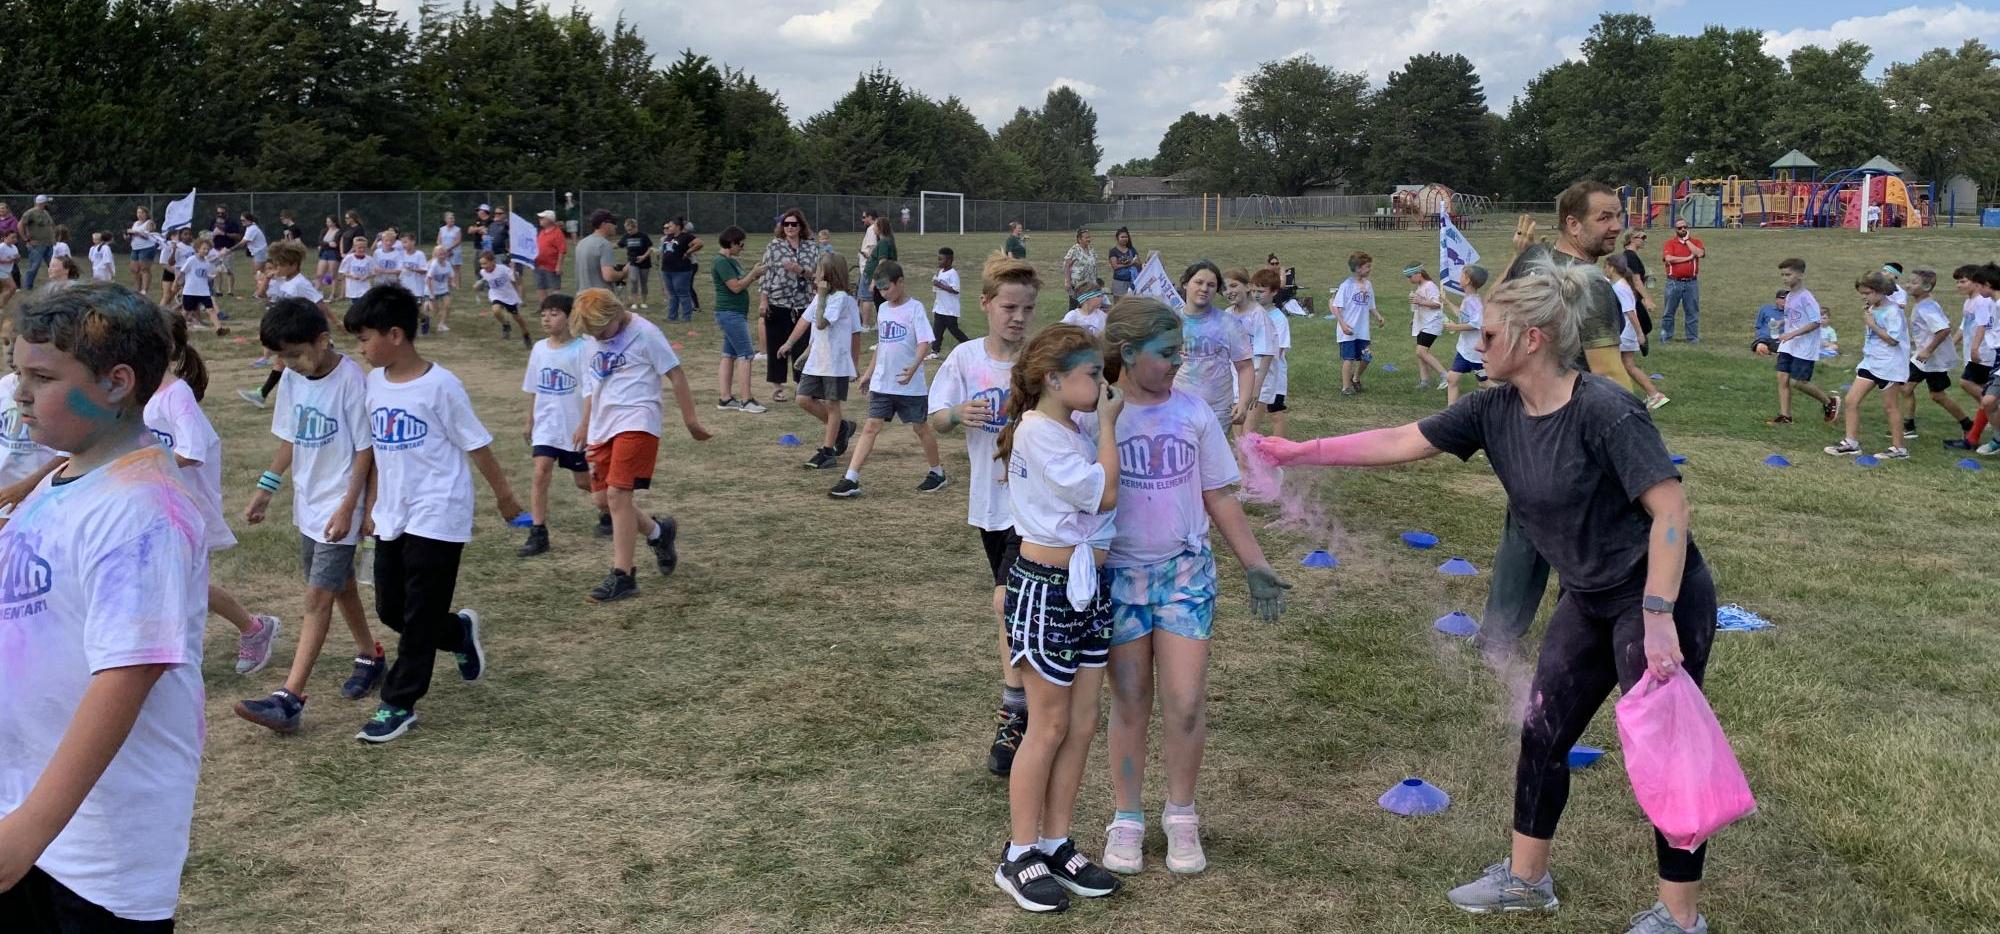 Parent throwing color powder on students during the Color Fun Run